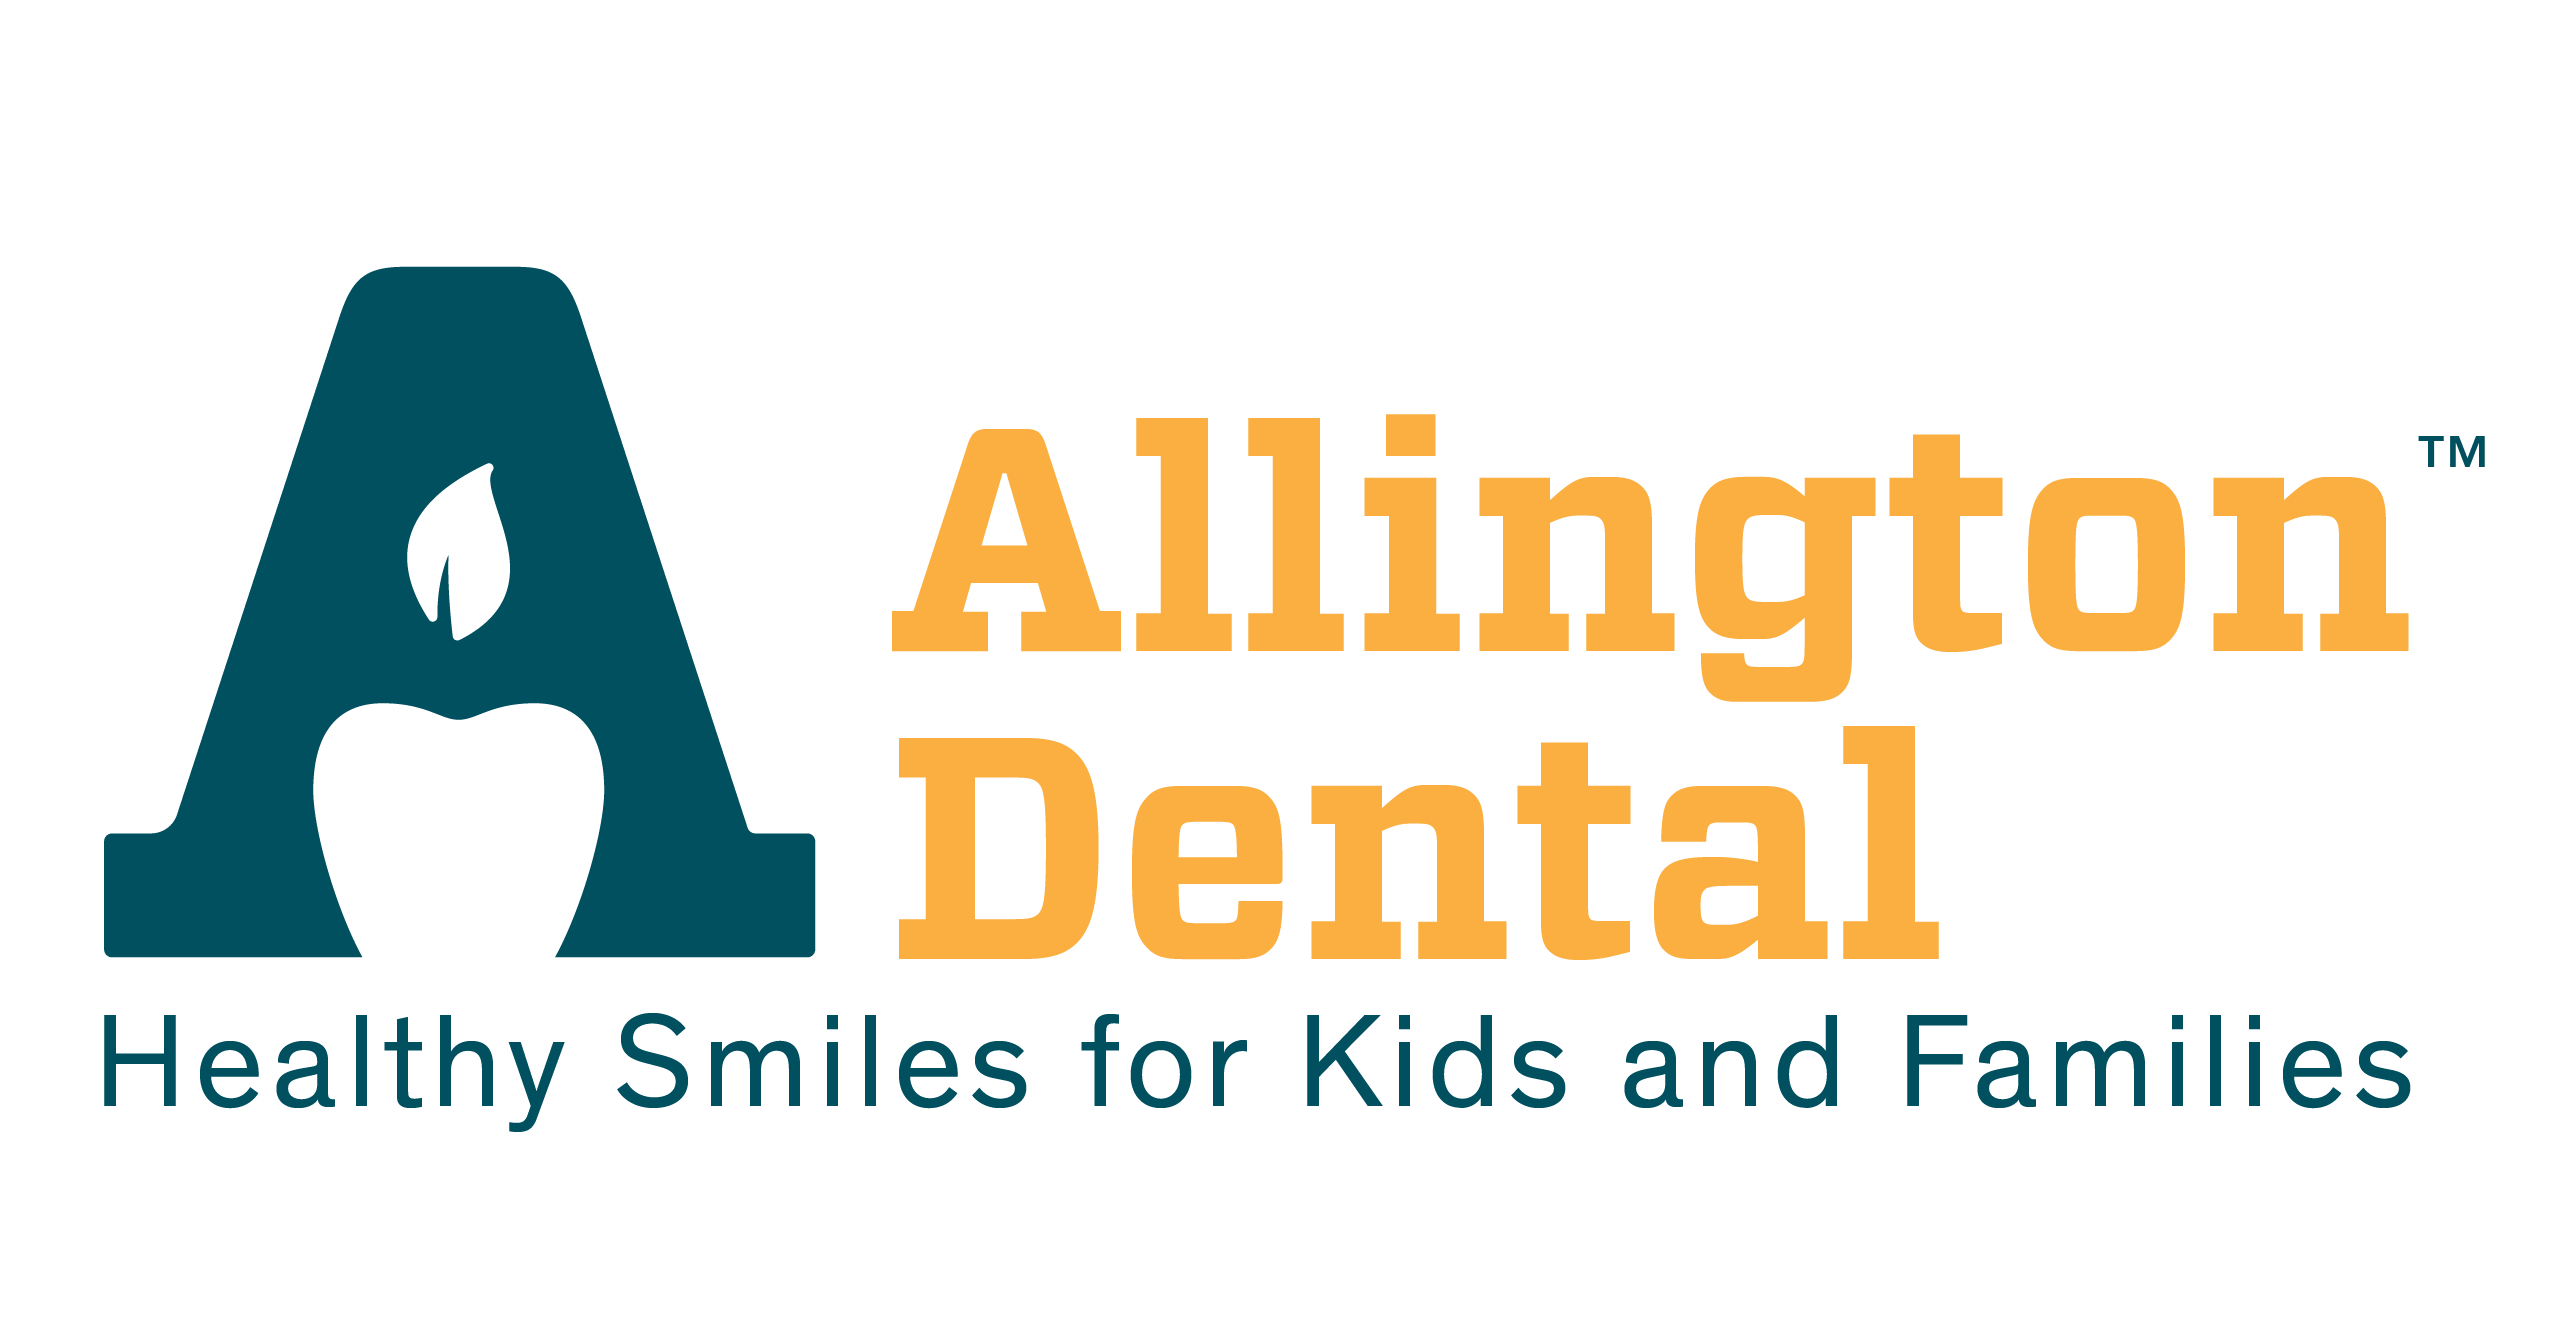 Appointment Logo - Allington Dental | Schedule an Appointment Today